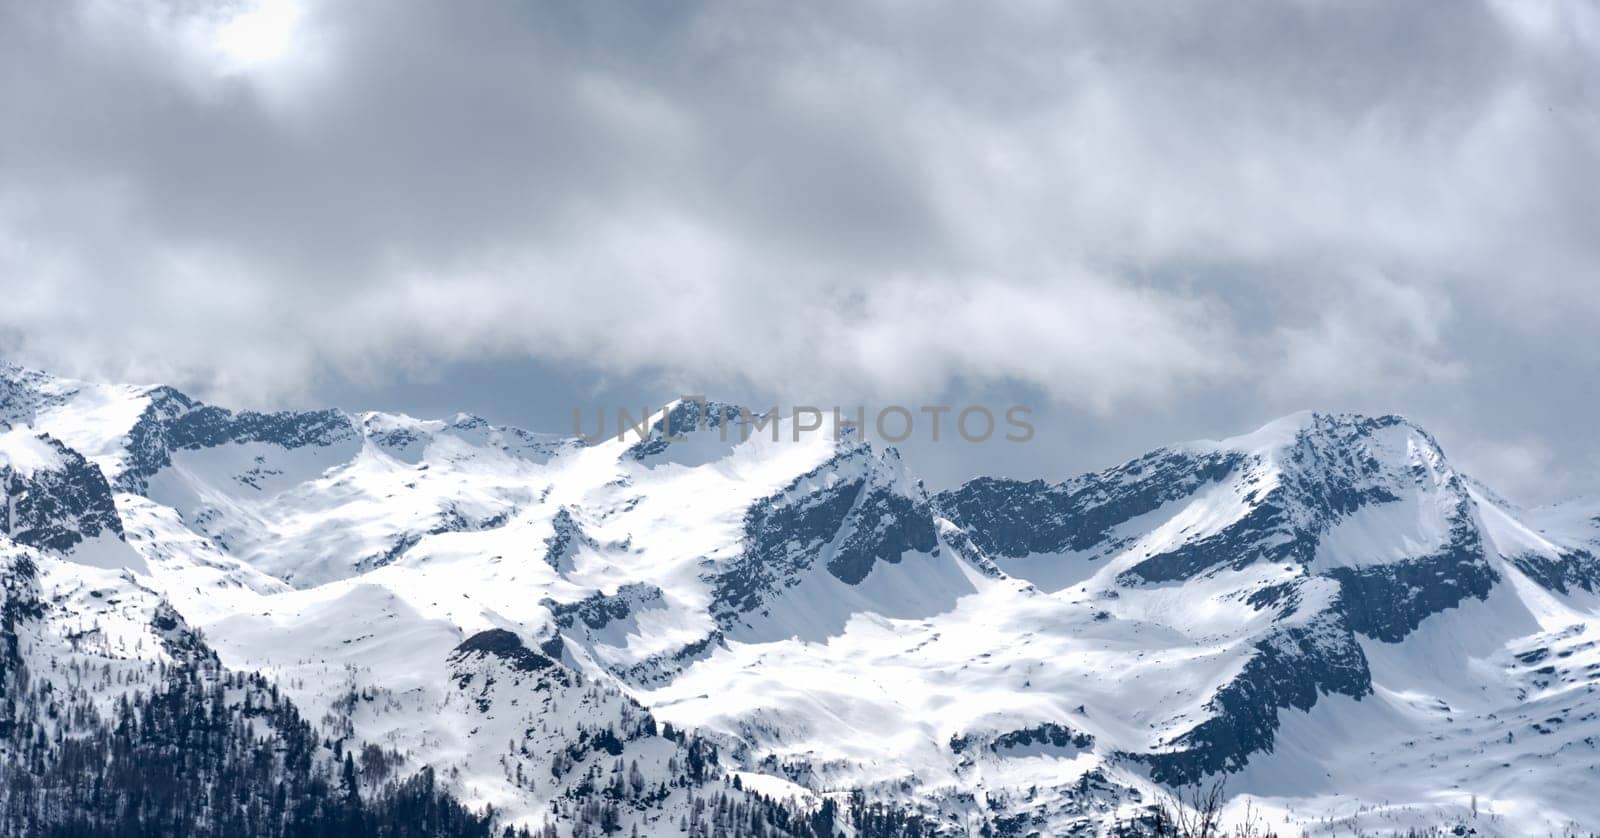 Snowy mountain and cloudy sky in Austrian alps, scenery image of Alps